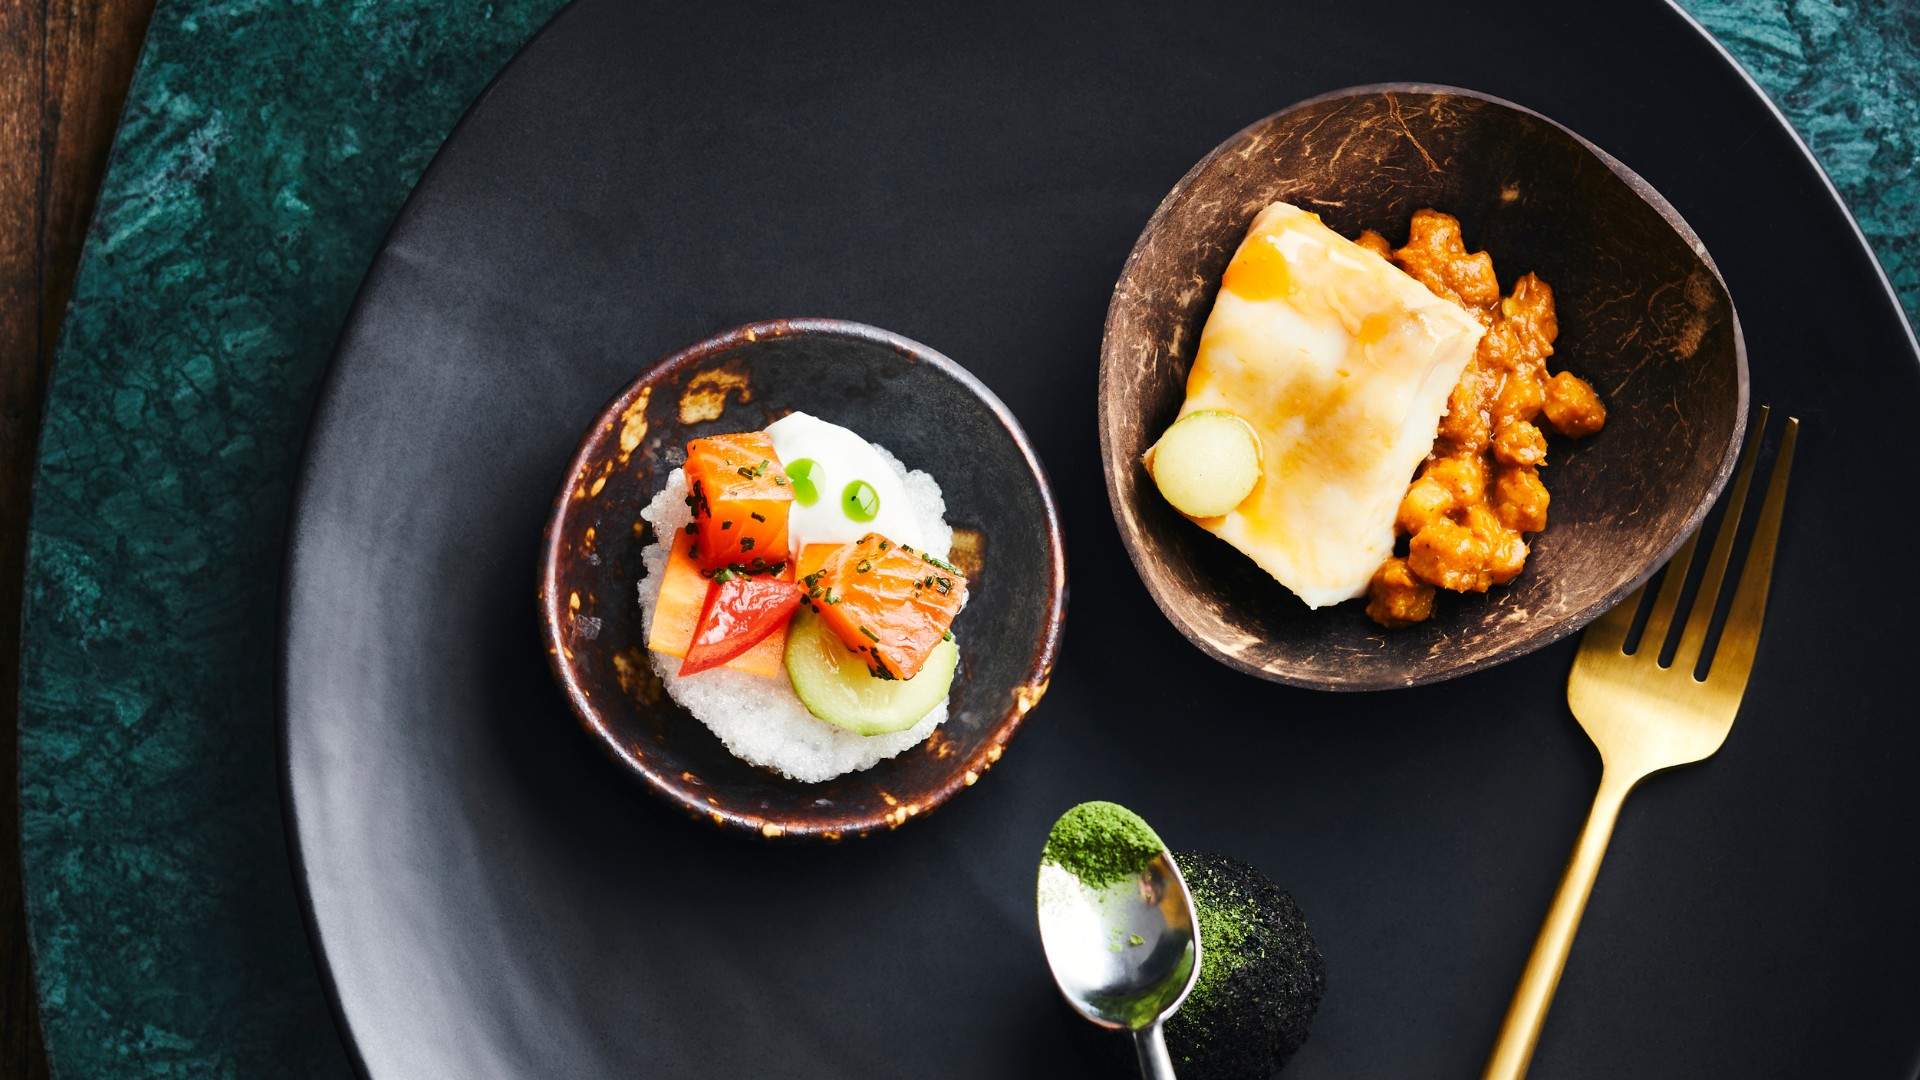 Coming Soon: TALA Is New Zealand's First-Ever Restaurant Dedicated to Modern Samoan Cuisine